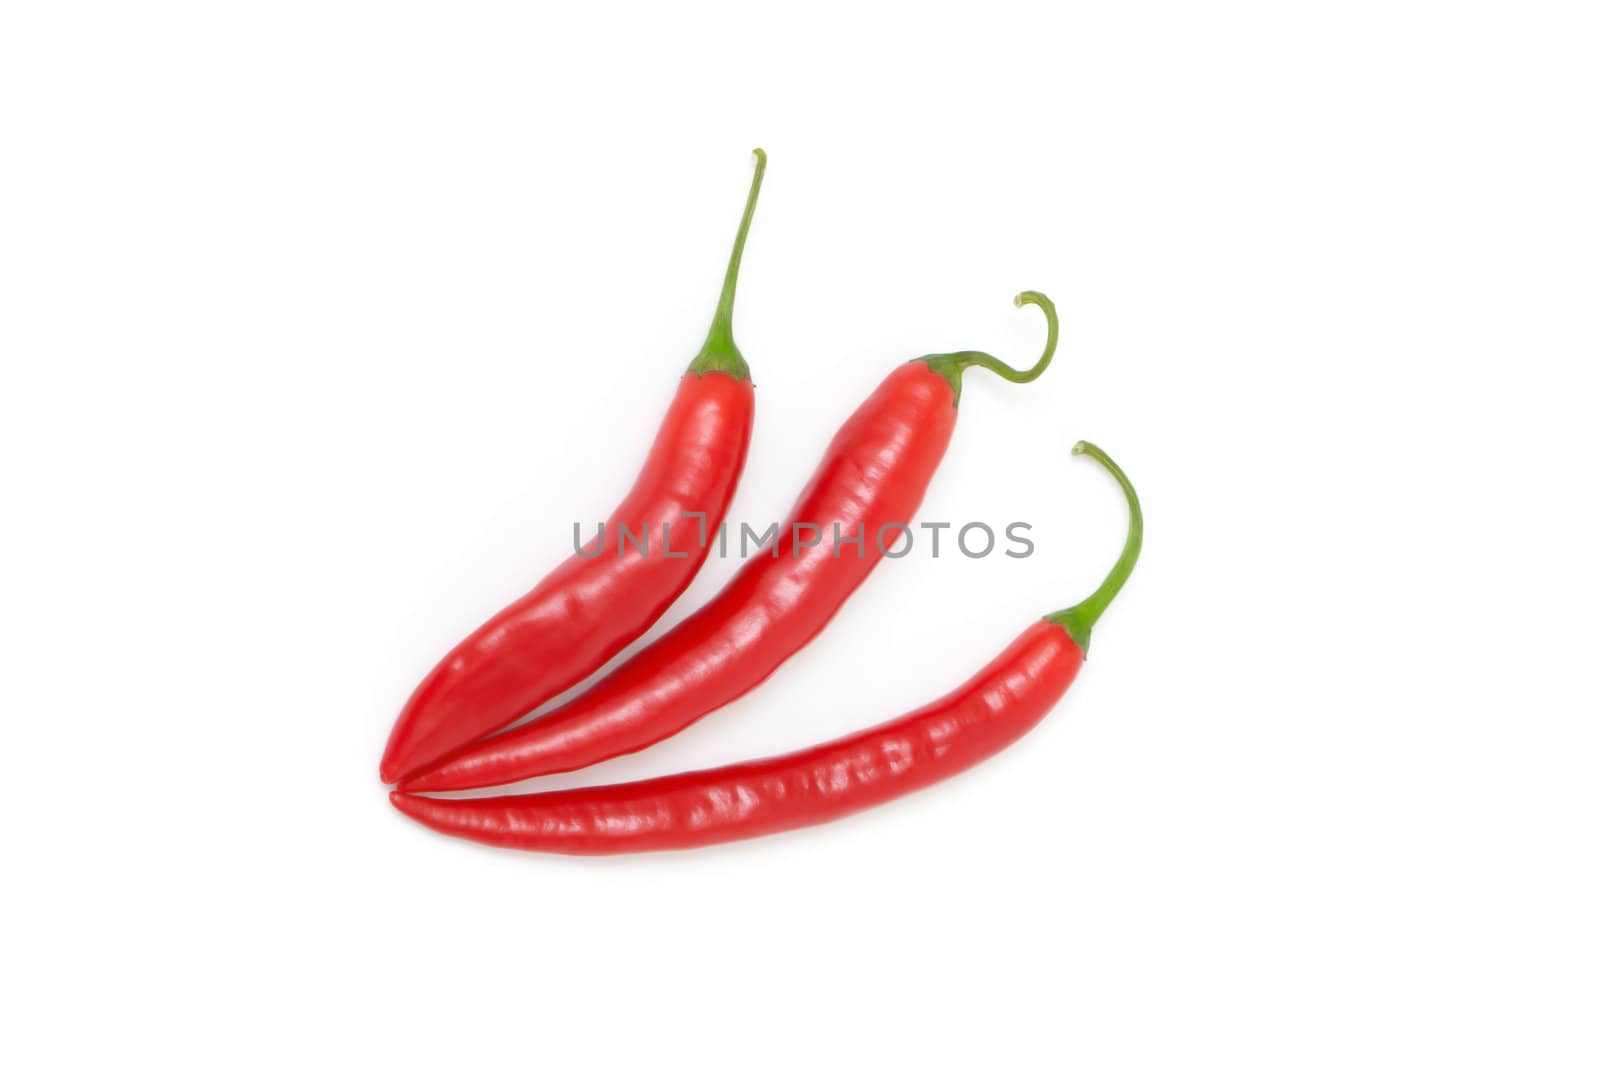 Three red hot chili peppers on white background